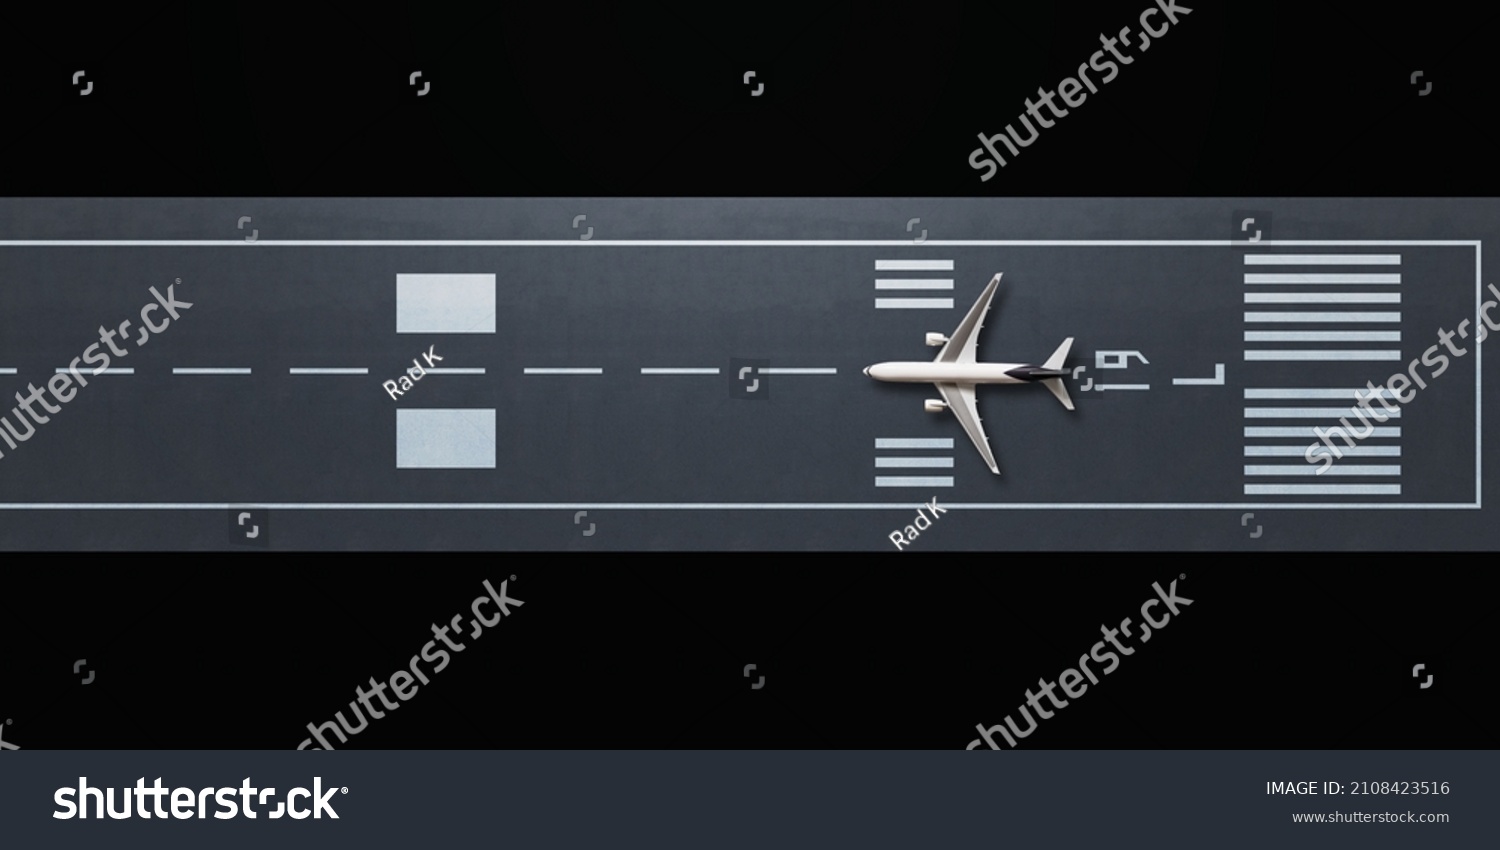 Top view of airplane model on the runway, flat lay design. #2108423516